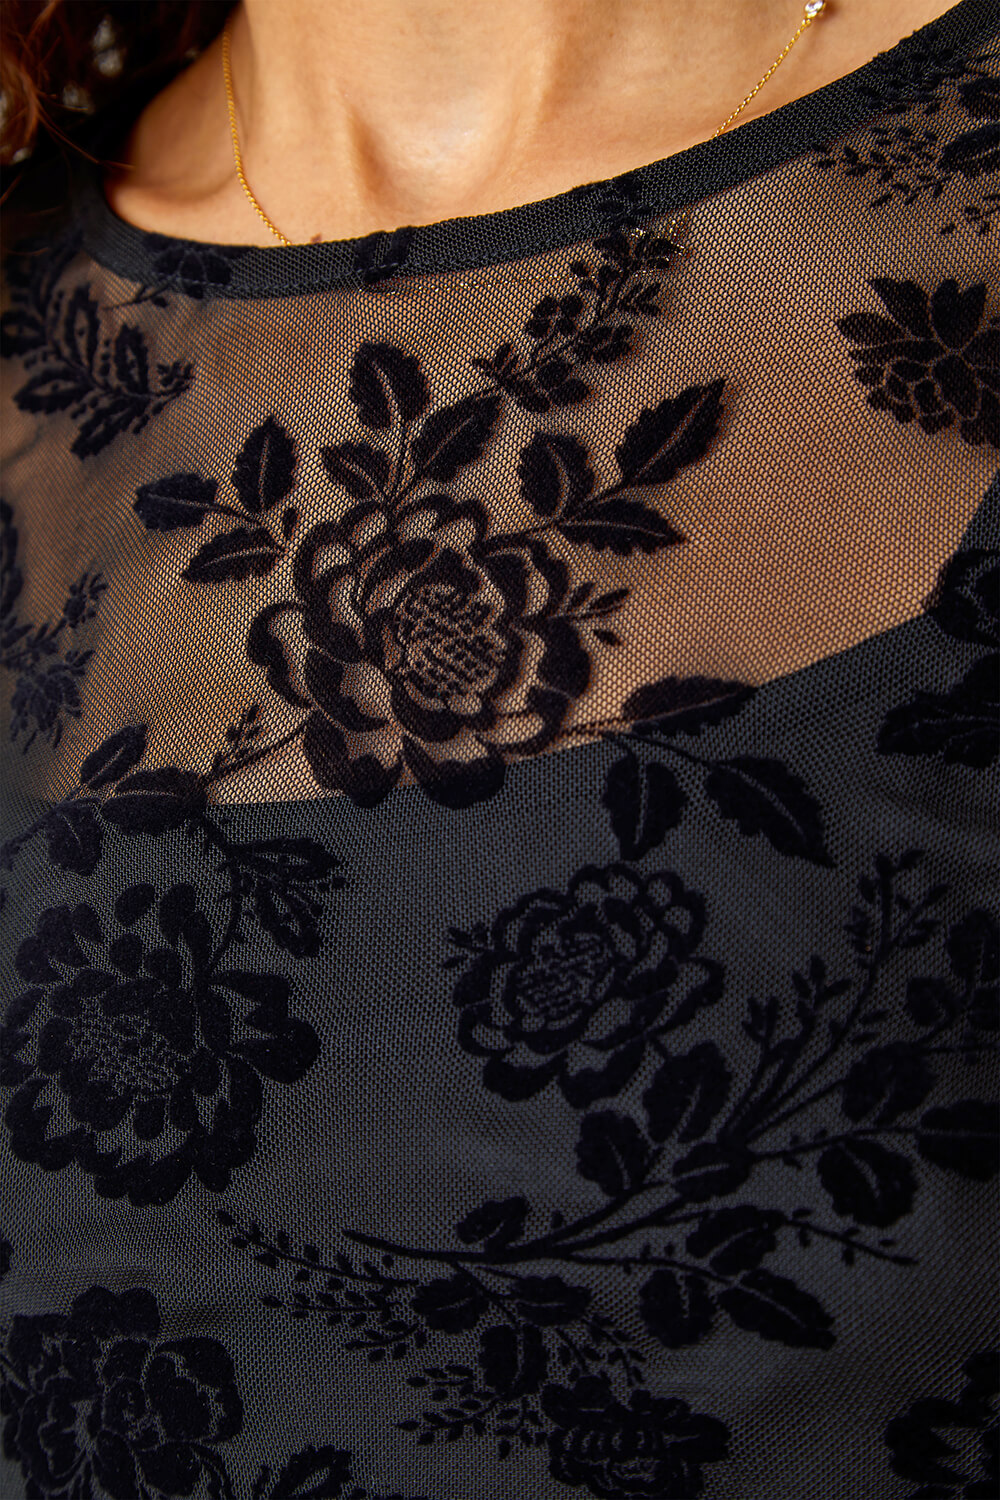 Black Textured Floral Print Mesh Stretch Top, Image 5 of 5